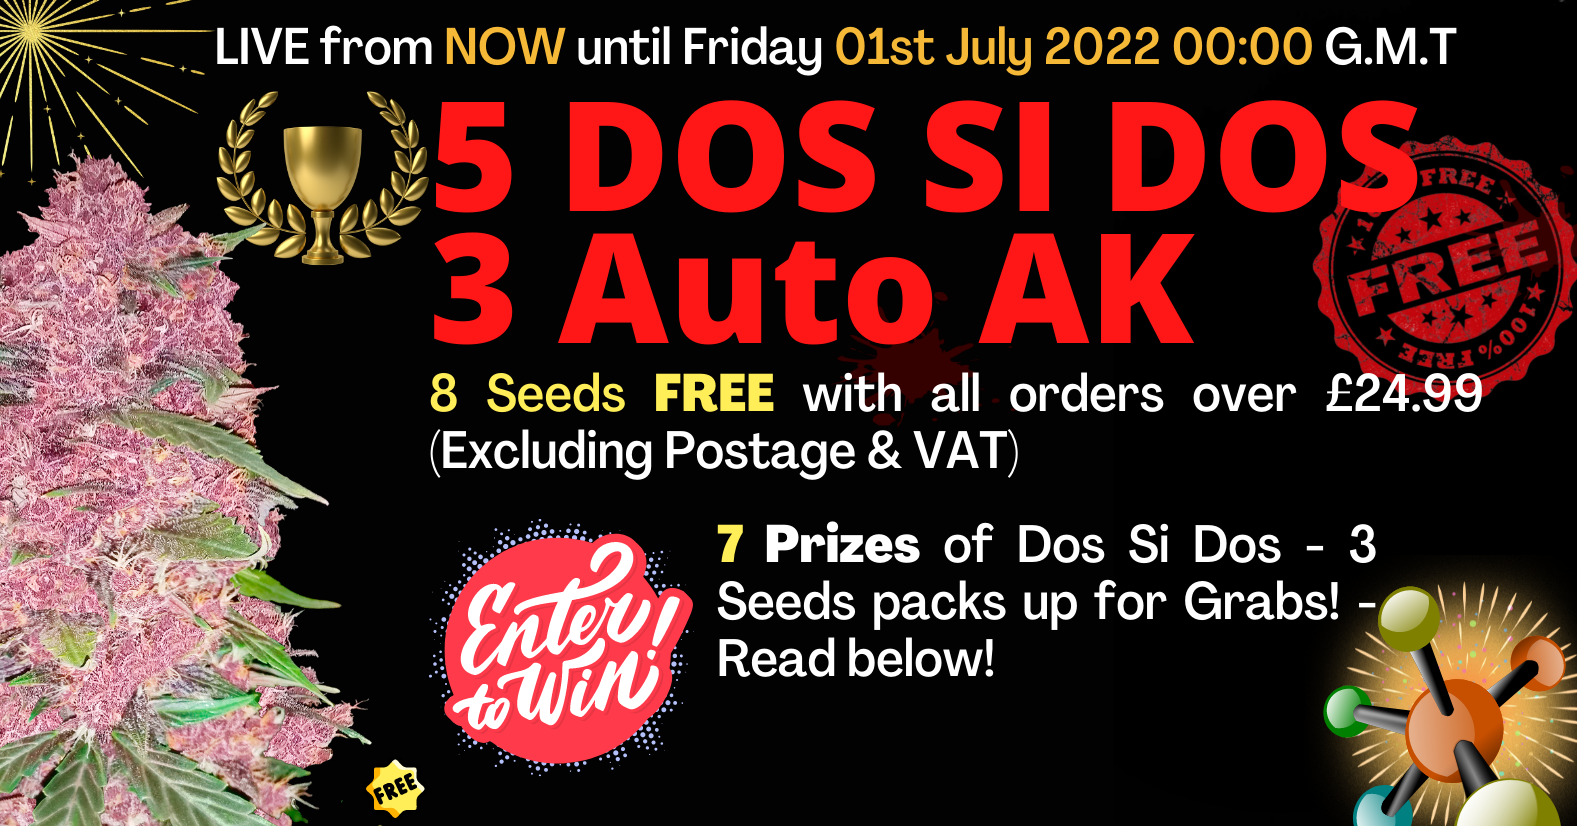 ⌛ 5 Free Dos Si Dos + 3 Free AK Auto from Gorilla Seeds - Limited Time Offer ⌛⌛ (1577 × 826px).png